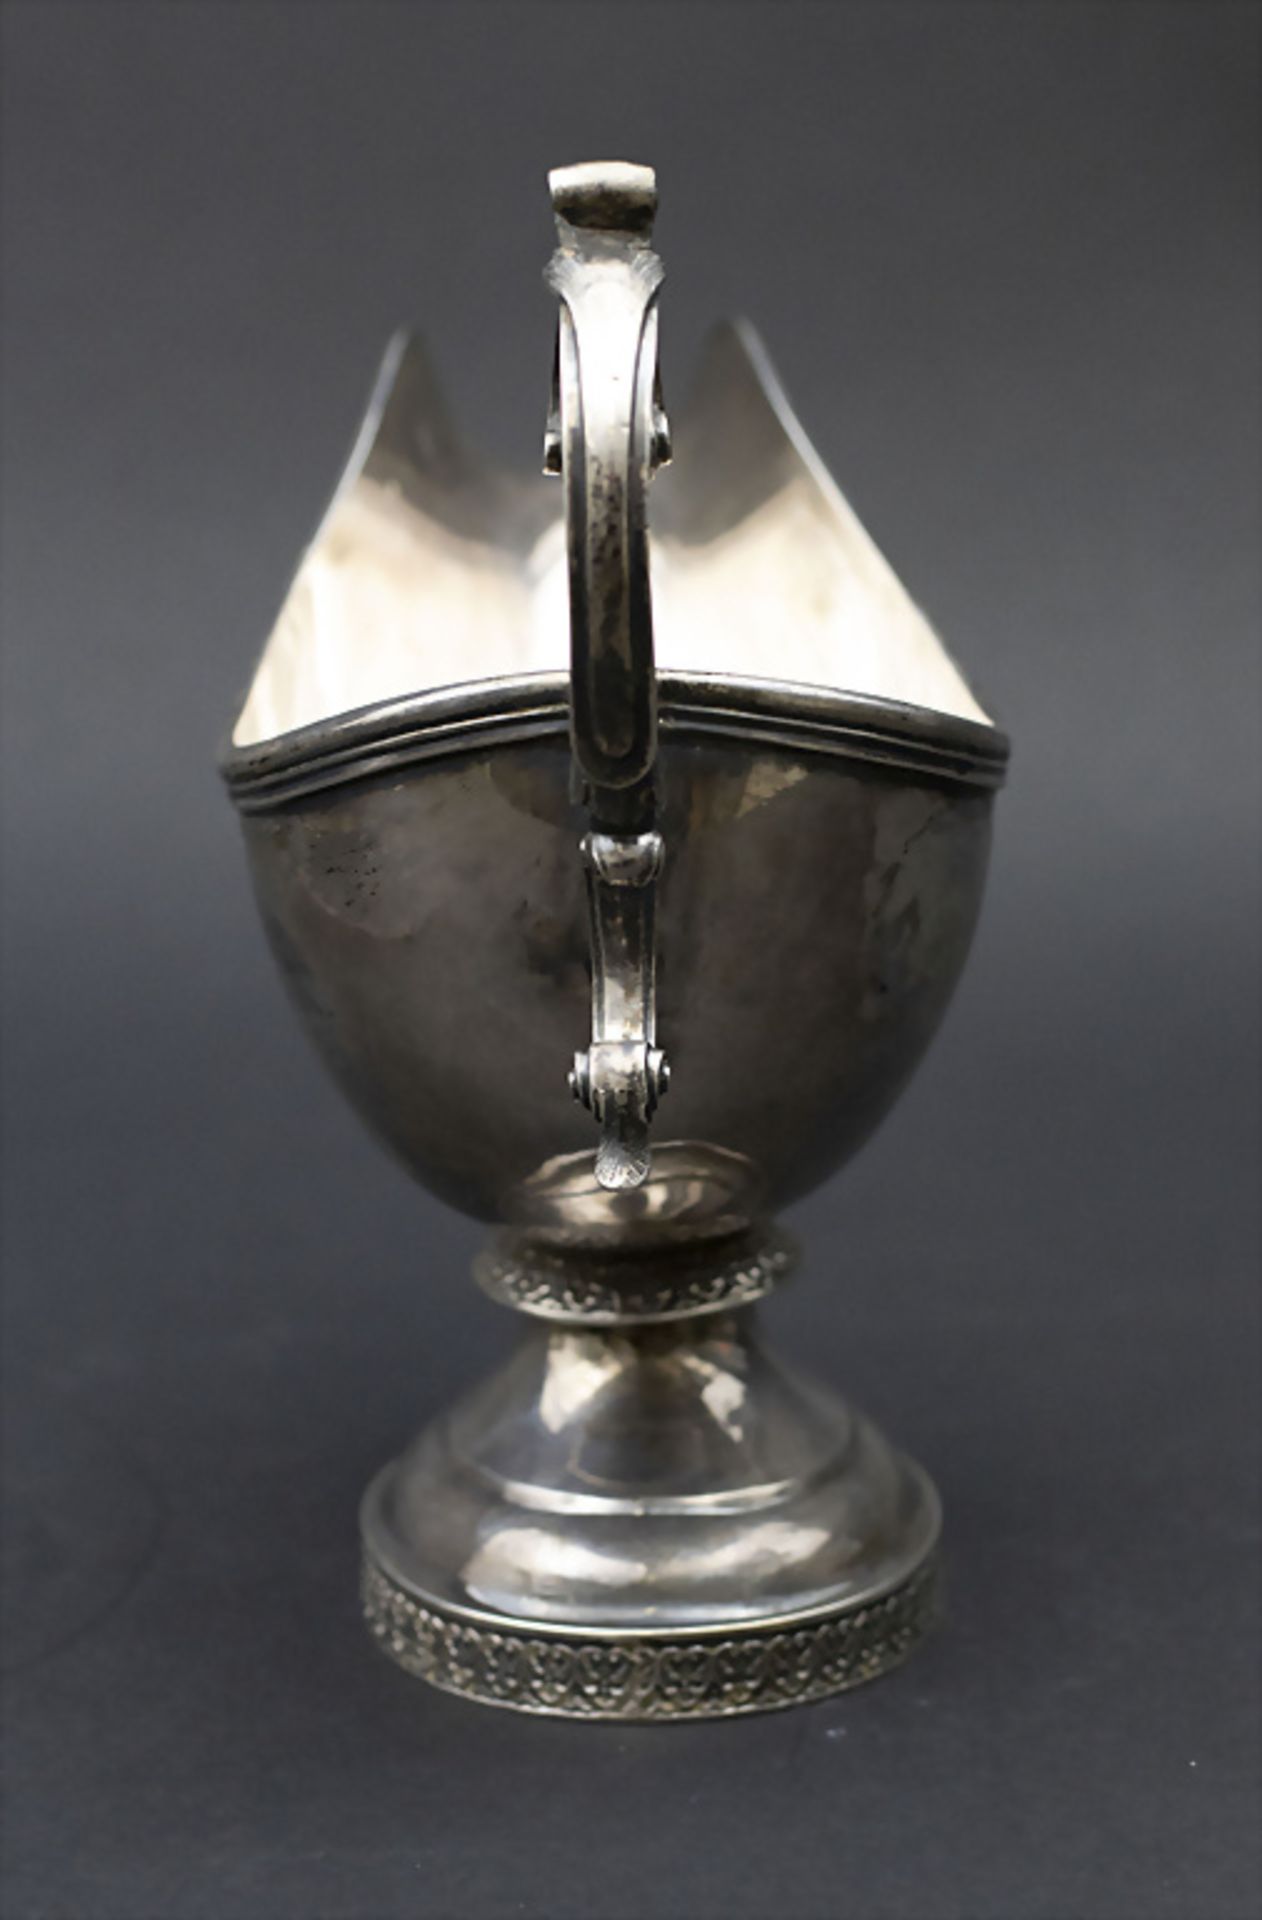 Sauciere / A silver gavy boat, Ball. Tompkins & Black, New York, 19. Jh. - Image 2 of 7